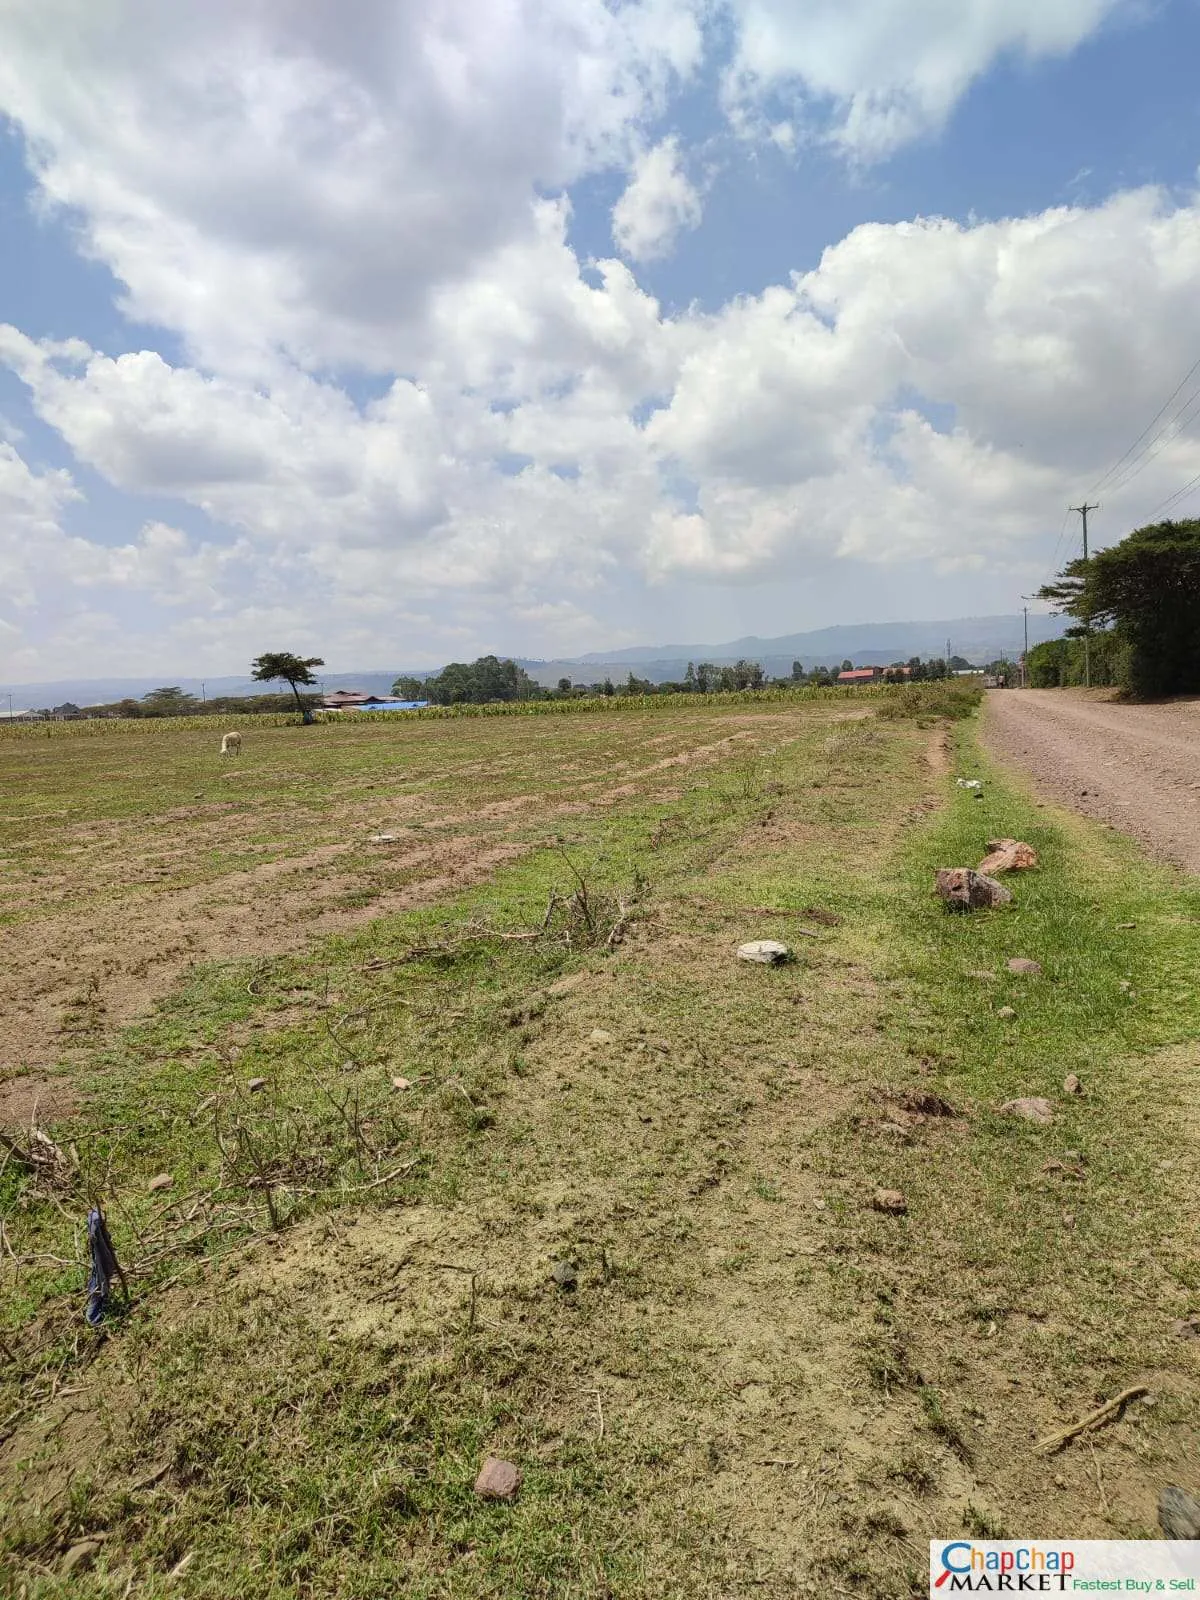 Land For Sale Real Estate-Land for Sale in Nakuru 3 acres for sale Eastgate Nakuru QUICK SALE Clean Title Deed 9